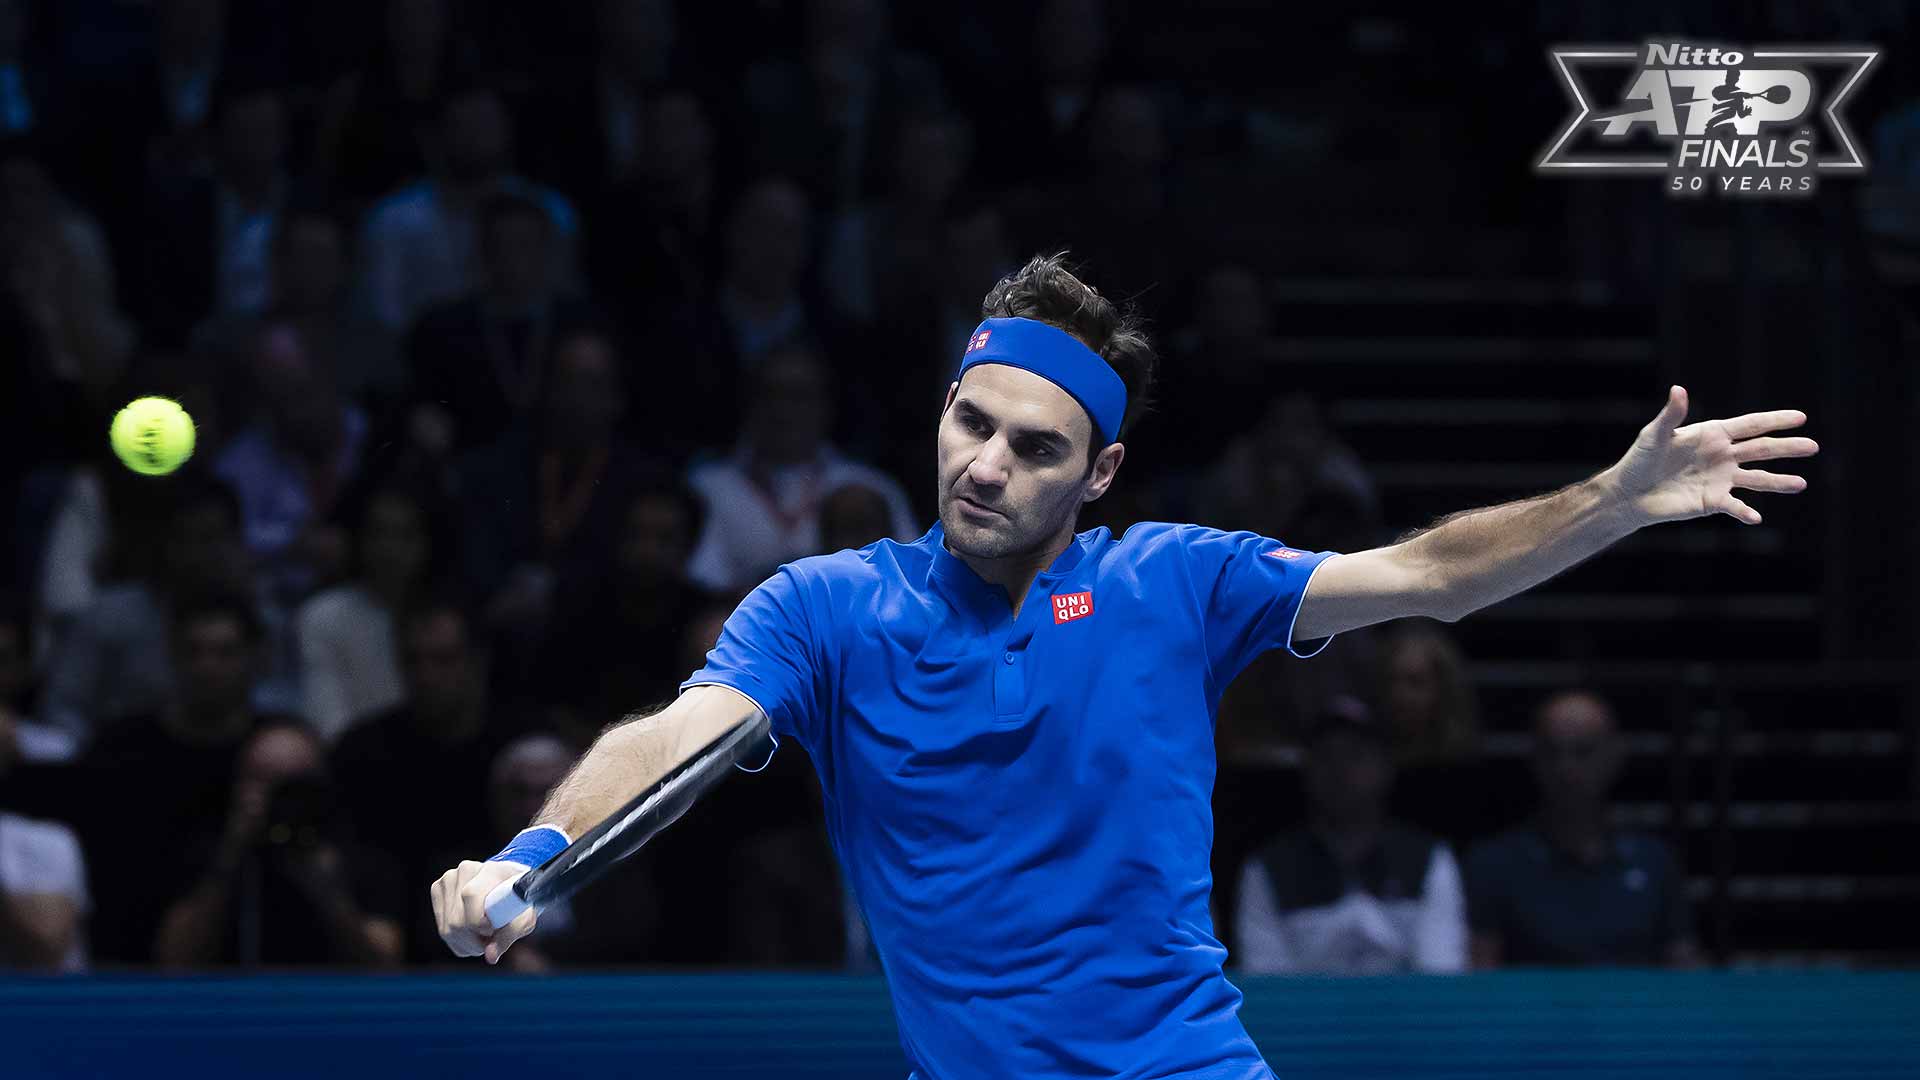 Roger Federer has reached the final ten times at the Nitto ATP Finals, a tournament record.